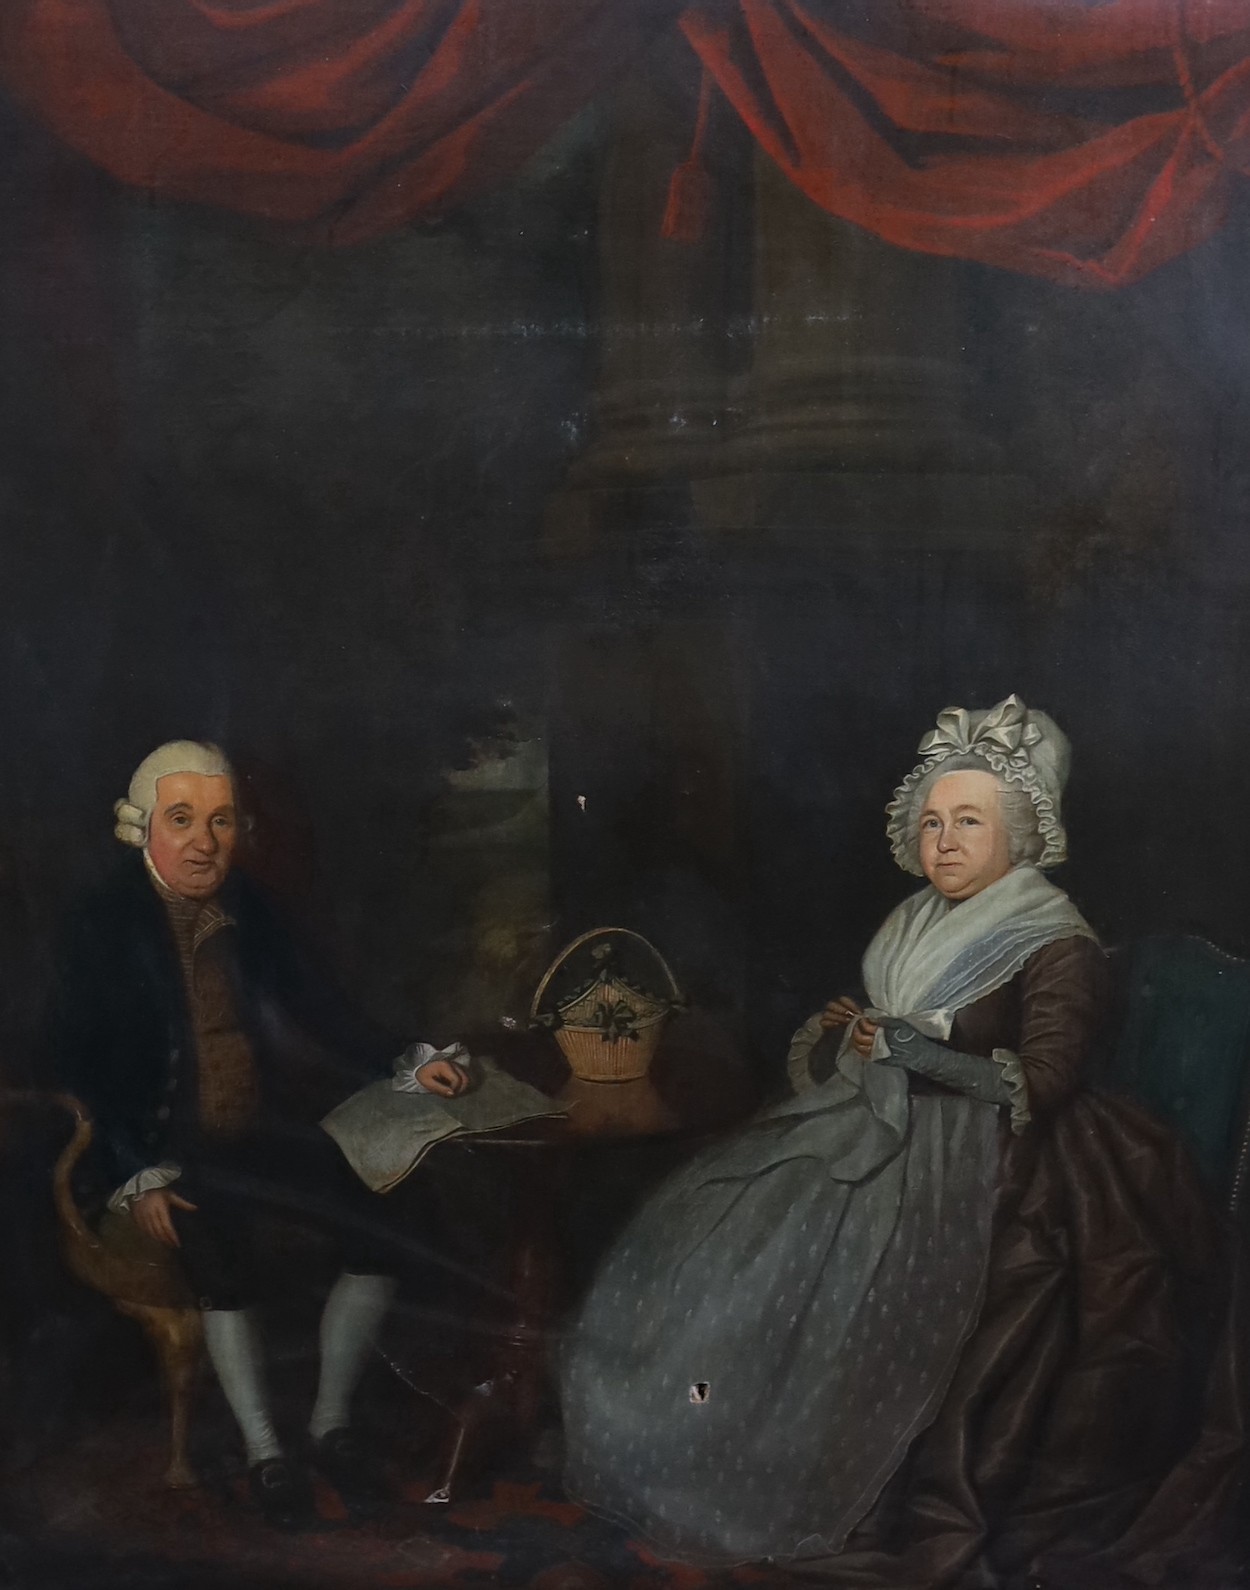 Late 18th Century English School, Full length portrait of Sir James Esdaile (1714-1793) and Elizabeth Pate, seated at table with columns, drapery, and a garden beyond, oil on canvas, 124 x 99cm